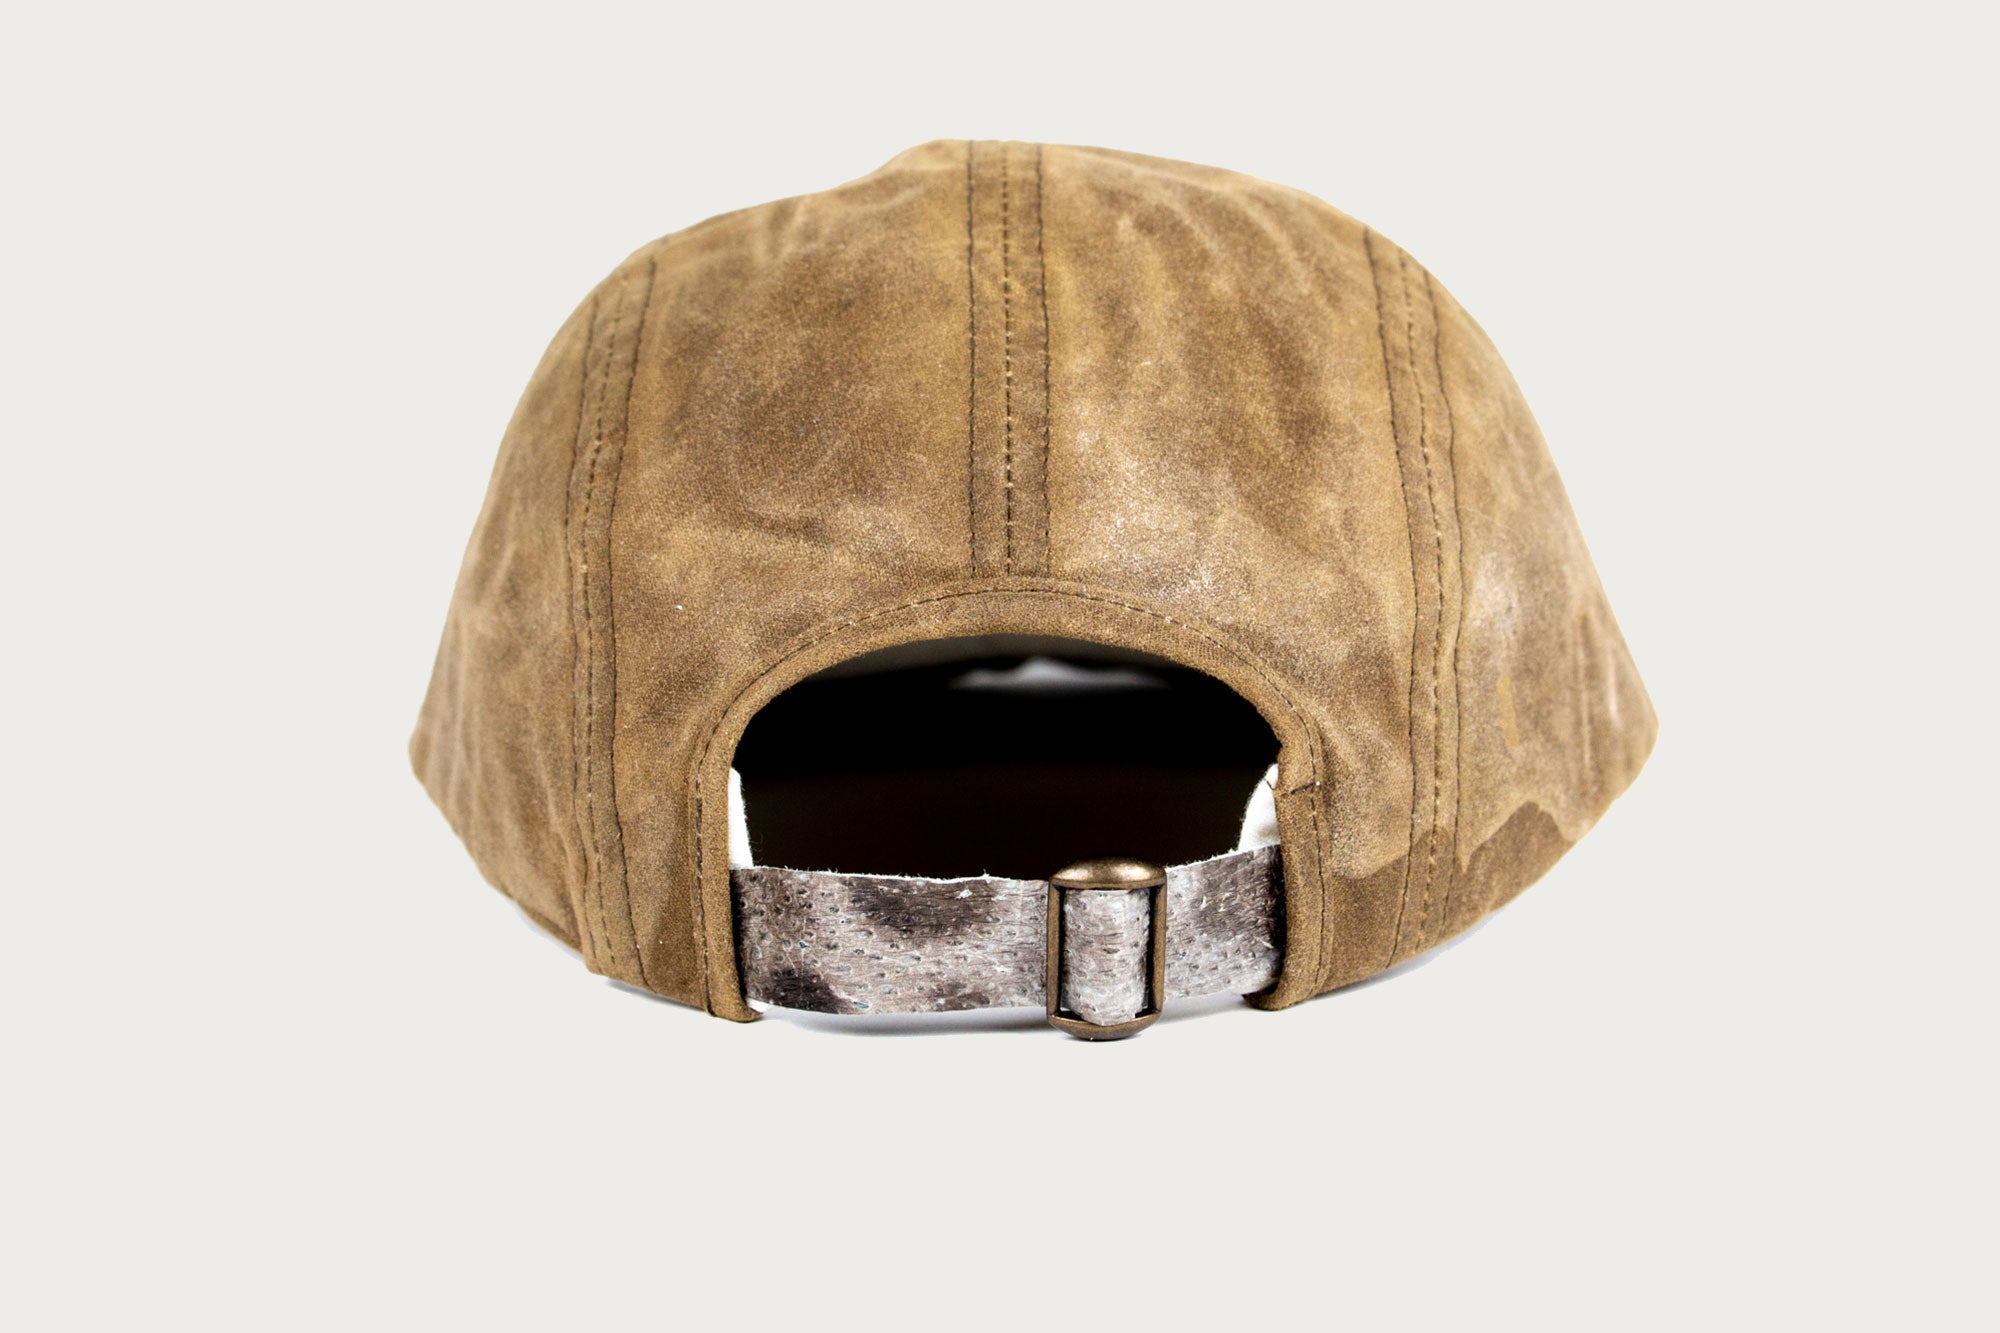 Quint Fishing Cap. Waxed cotton 4 panel cap with front pockets